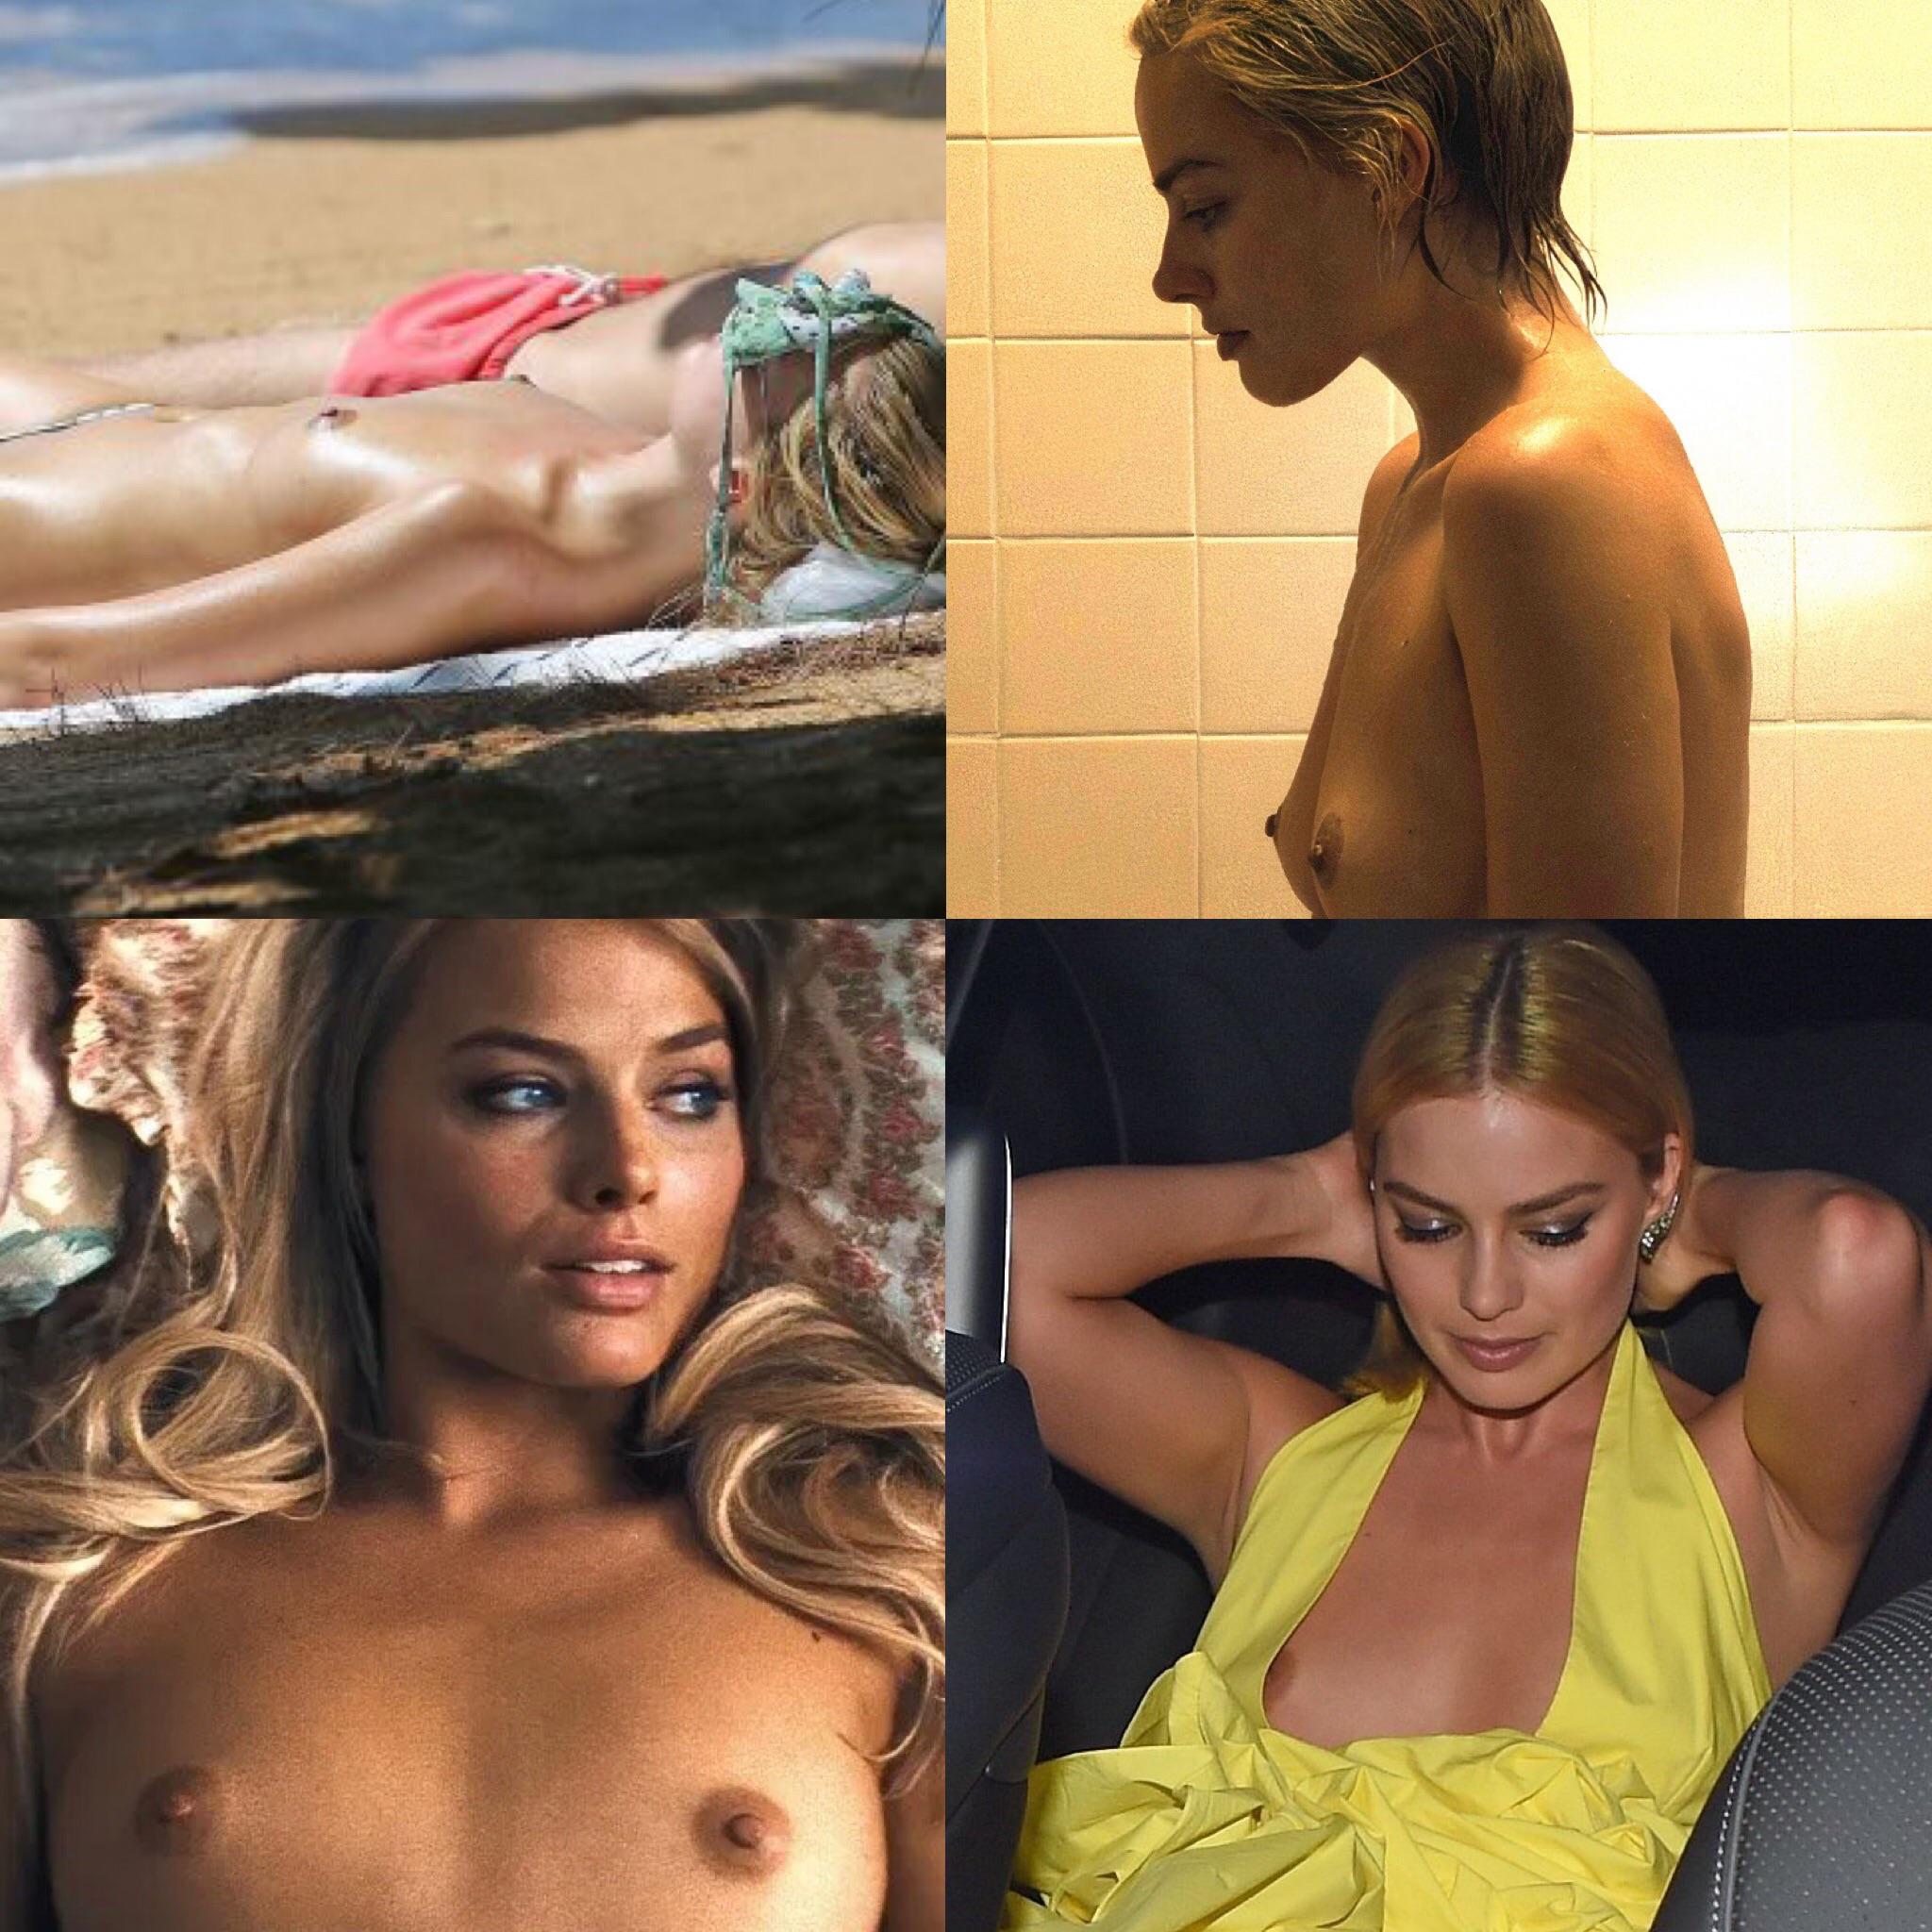 Margot Robbie‘s nipples are simply perfection and unbelievable beautiful.